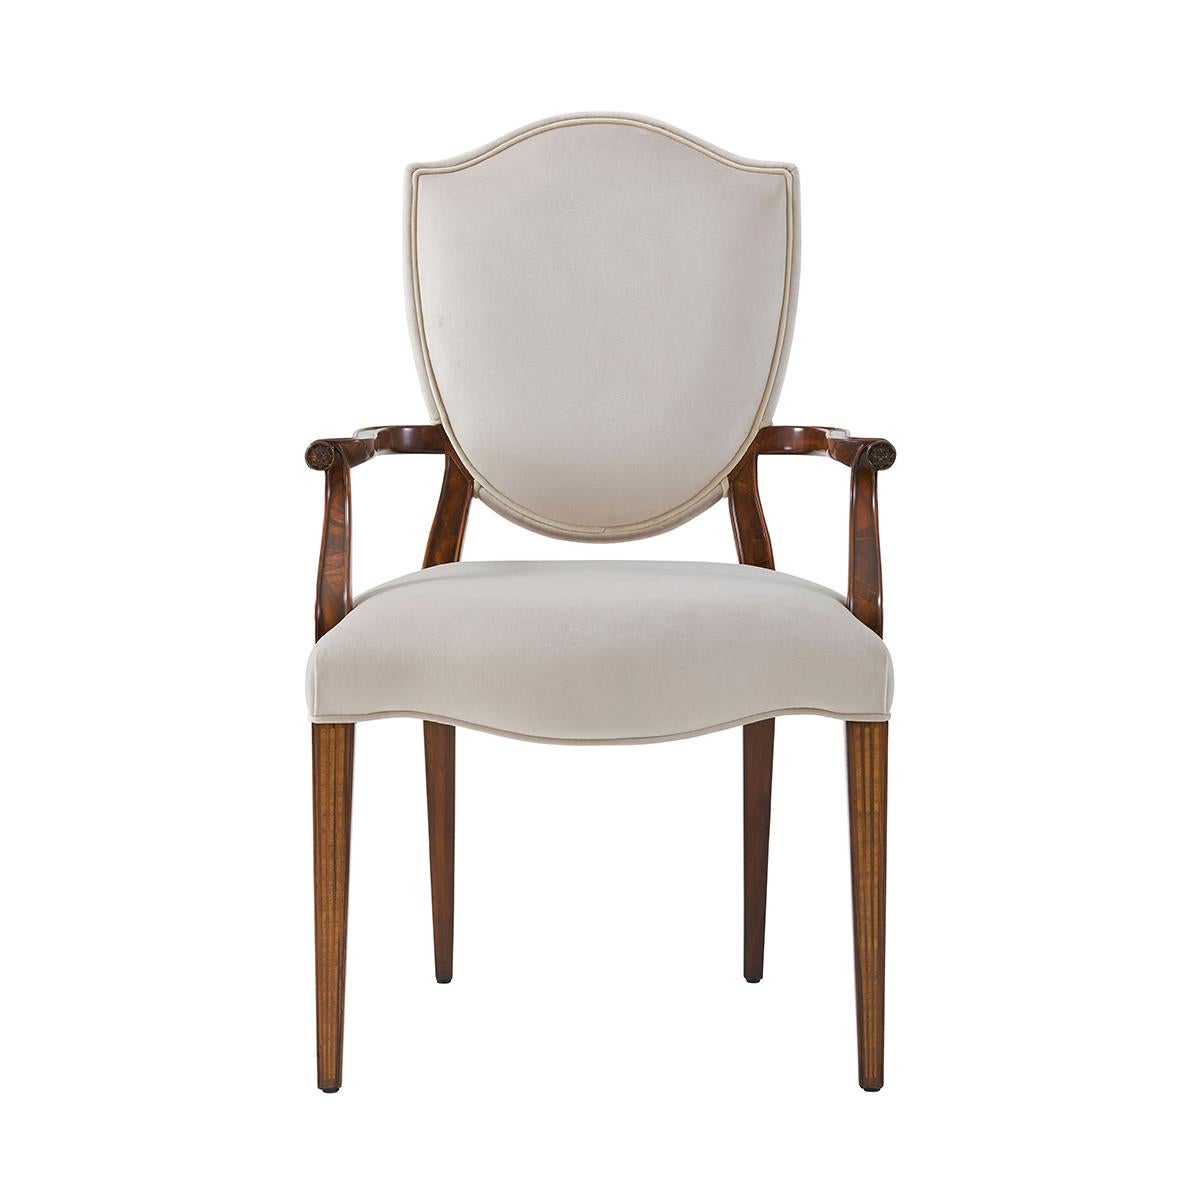 Two George III Hepplewhite style shield back armchairs, with an upholstered back with flame mahogany veneered back Supports and scroll arms with rosette terminals, the upholstered seat on square tapering legs with satinwood faux fluted